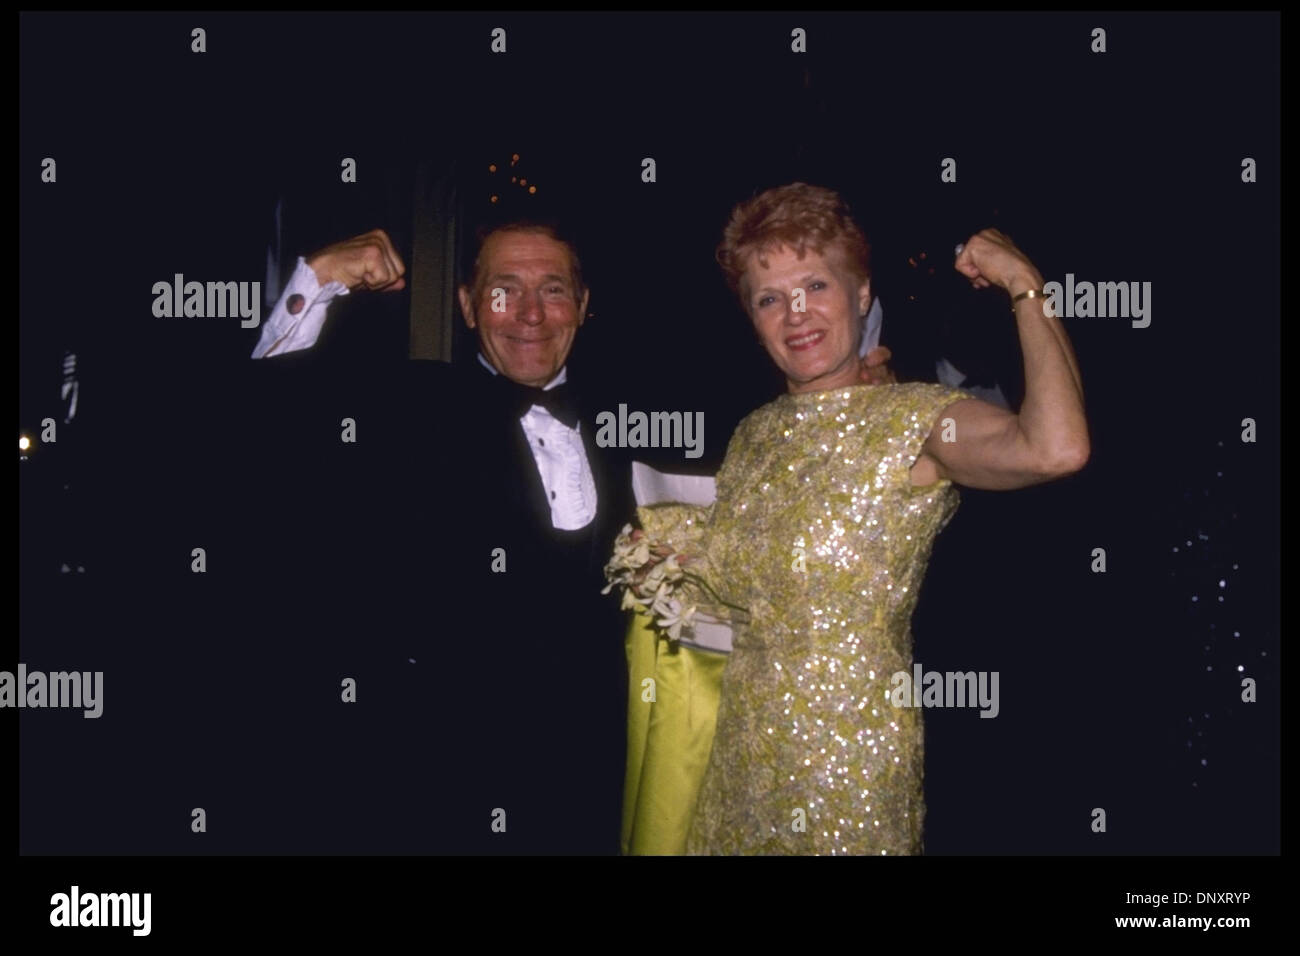 1986; Hollywood, CA, USA; JACK LALANNE and wife ELAINE LALANNE are shown in a photo taken in 1986.  Mandatory Credit: Kathy Hutchins/ZUMA Press. (©) Kathy Hutchins Stock Photo